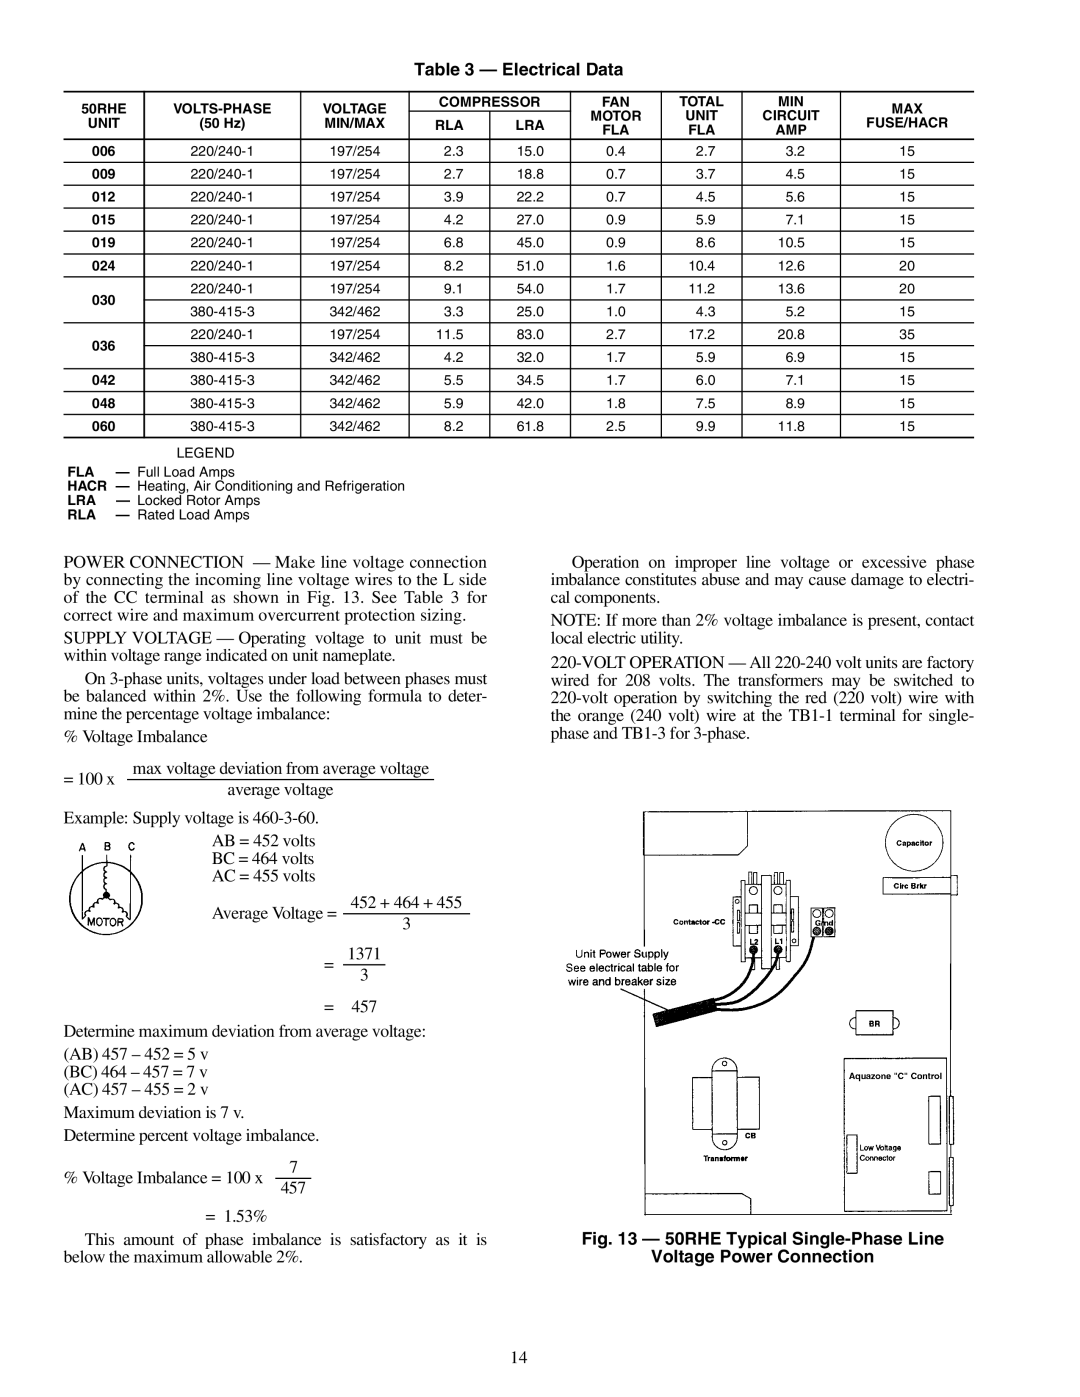 Carrier 50RHE006-060 specifications Electrical Data, 50RHE Typical Single-PhaseLine, Voltage Power Connection 